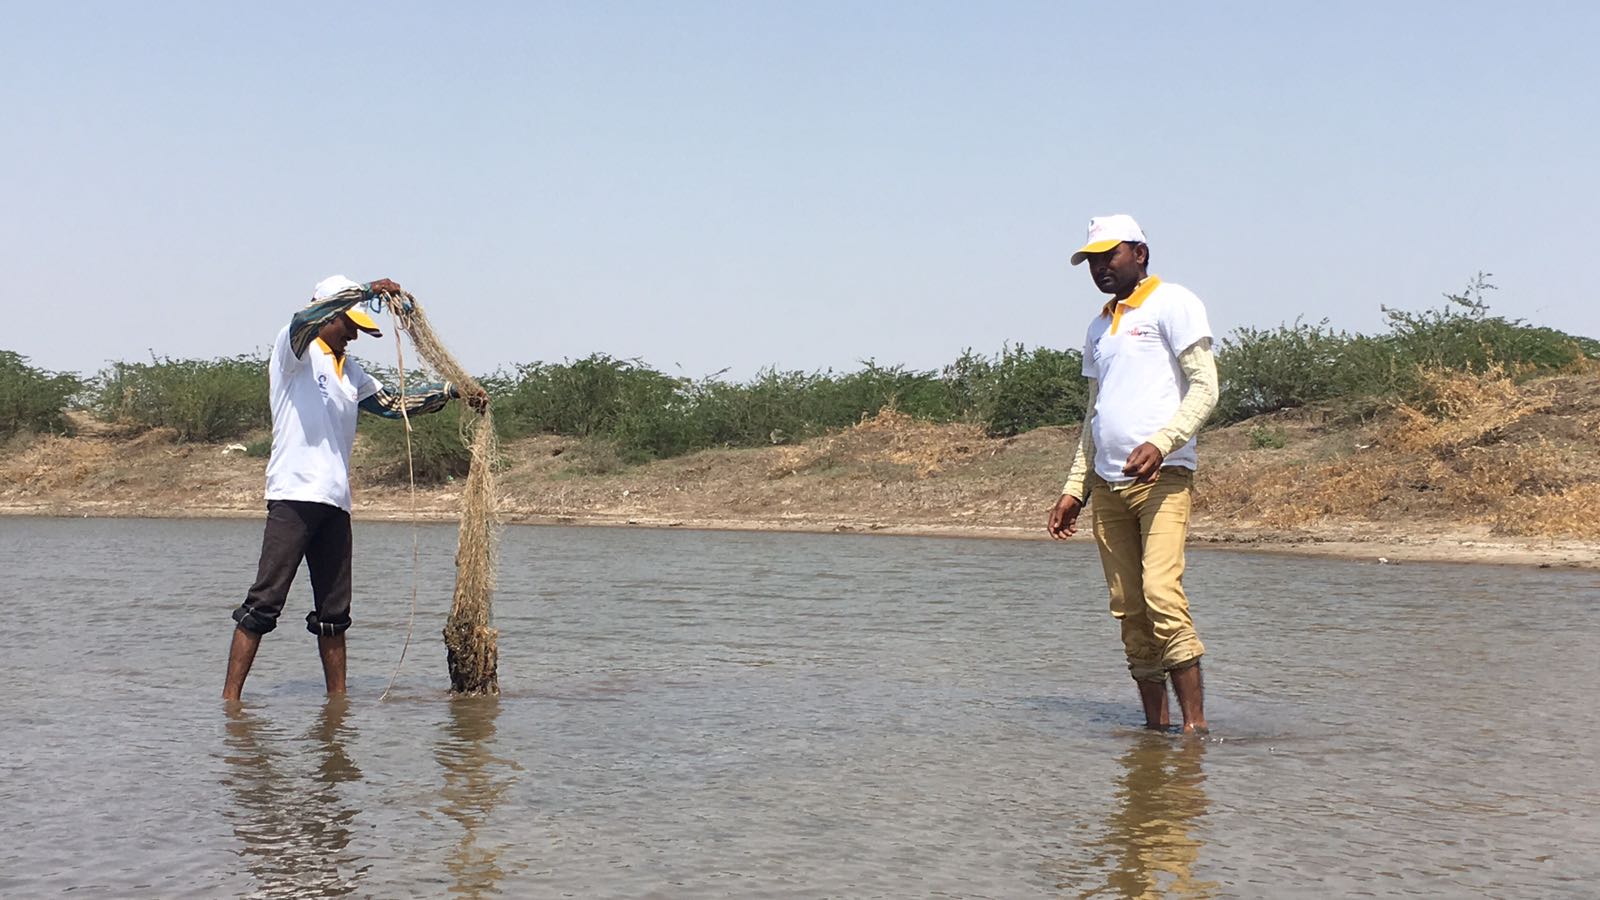 LabourNet on Twitter: "Marine Capture Fisherman Cum Primary Processor  practising fishing during the RPL program conducted by @labournet in  association with #NFDB held at Kutch, Gujarat @NSDCINDIA @MSDESkillIndia  @ASCI_AgriSkills ...